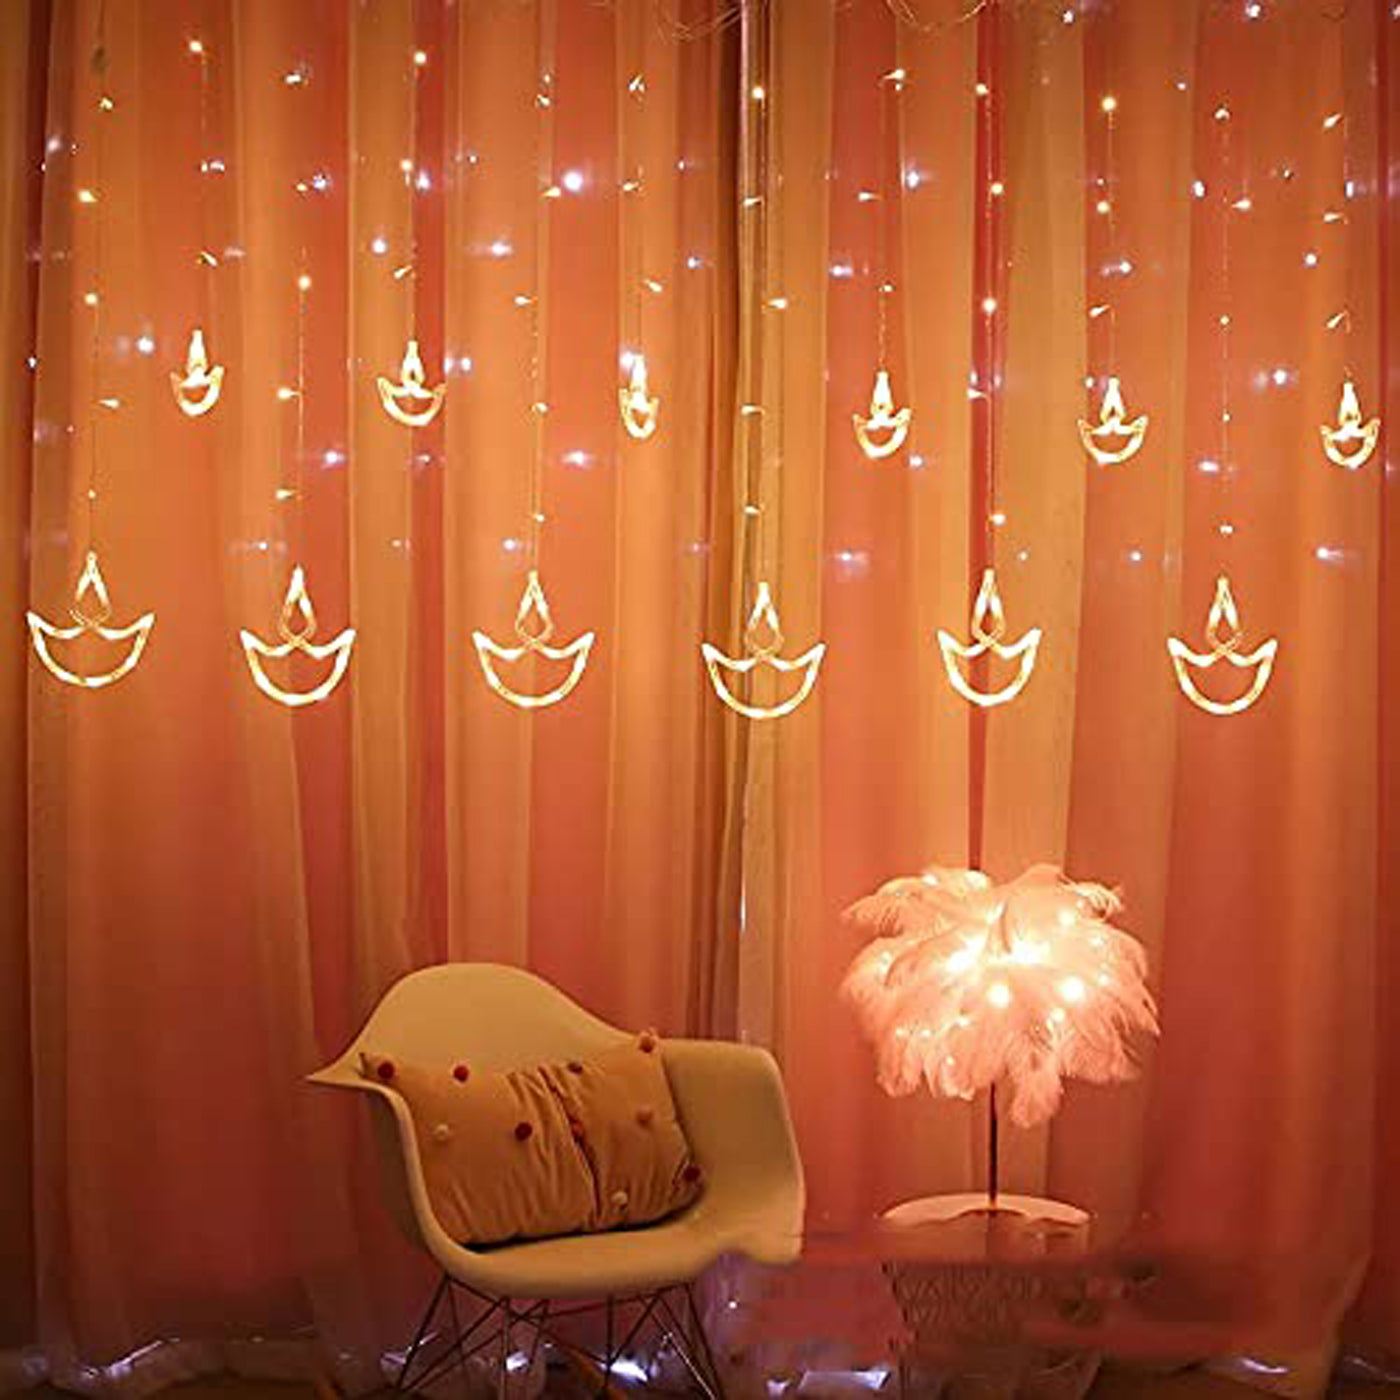 DecorTwist Fountain Rice Light for Wall Decor| Home Decoration| Diwali Item| Christmas Item| Indoor & Outdoor Decoration Item| | Festival Item | 2.49 Mtr Length |138pcs LED (Warm White)